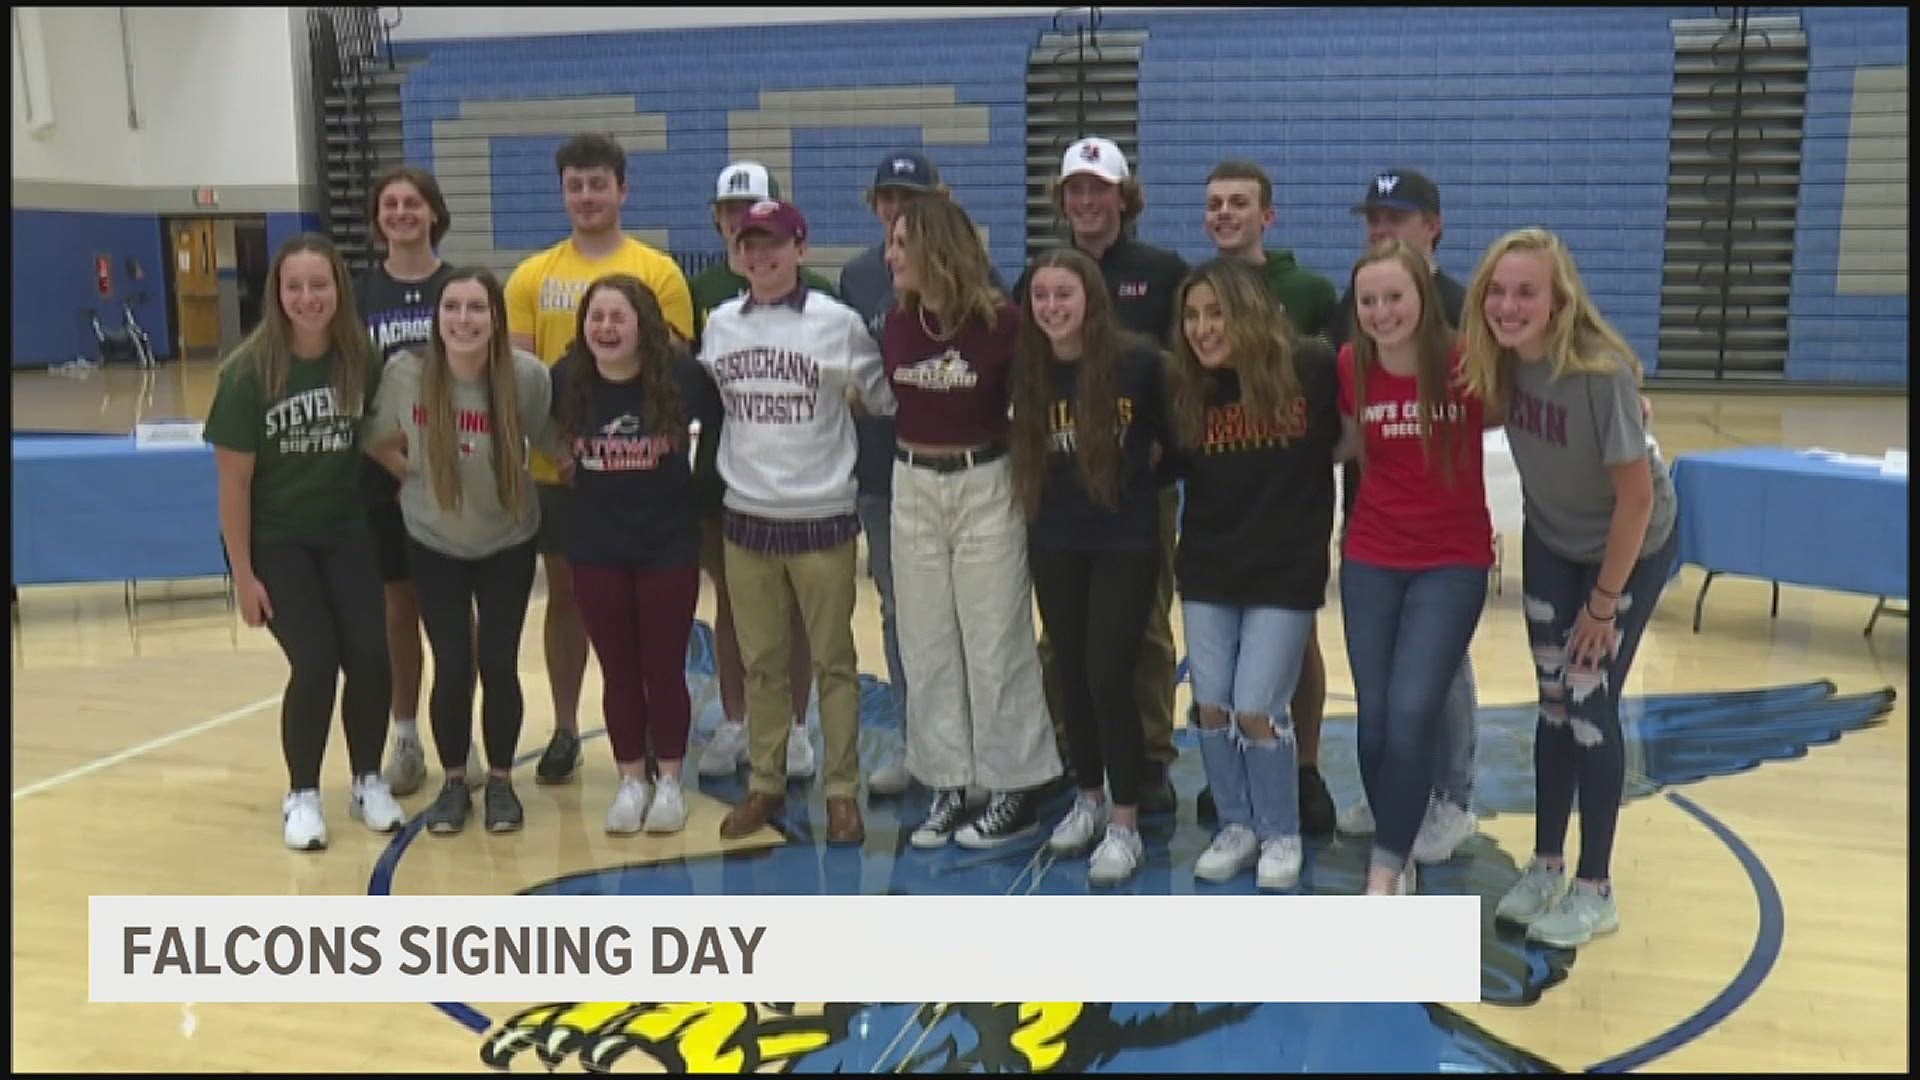 The student athletes cover eight different sports and are heading to schools in five states.